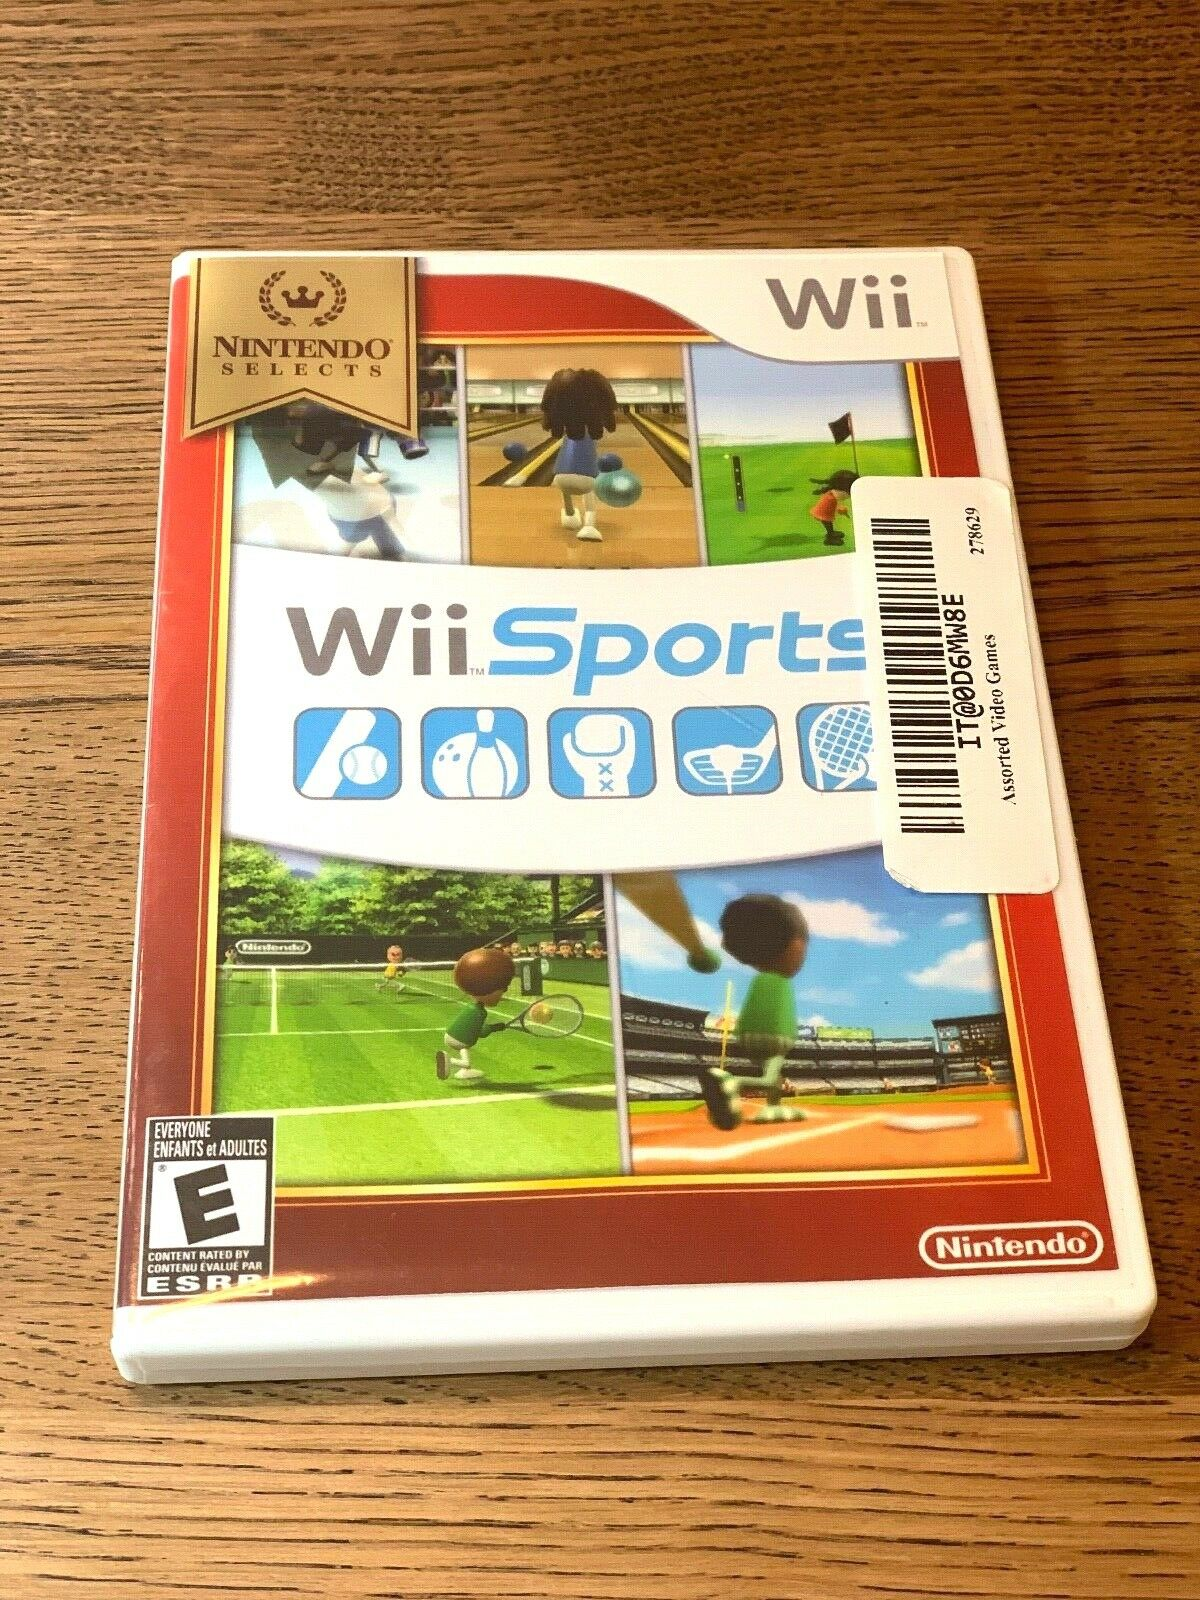 Shocked Electronics & Repairs. Nintendo Wii Sports (Wii, 2006) Wii 